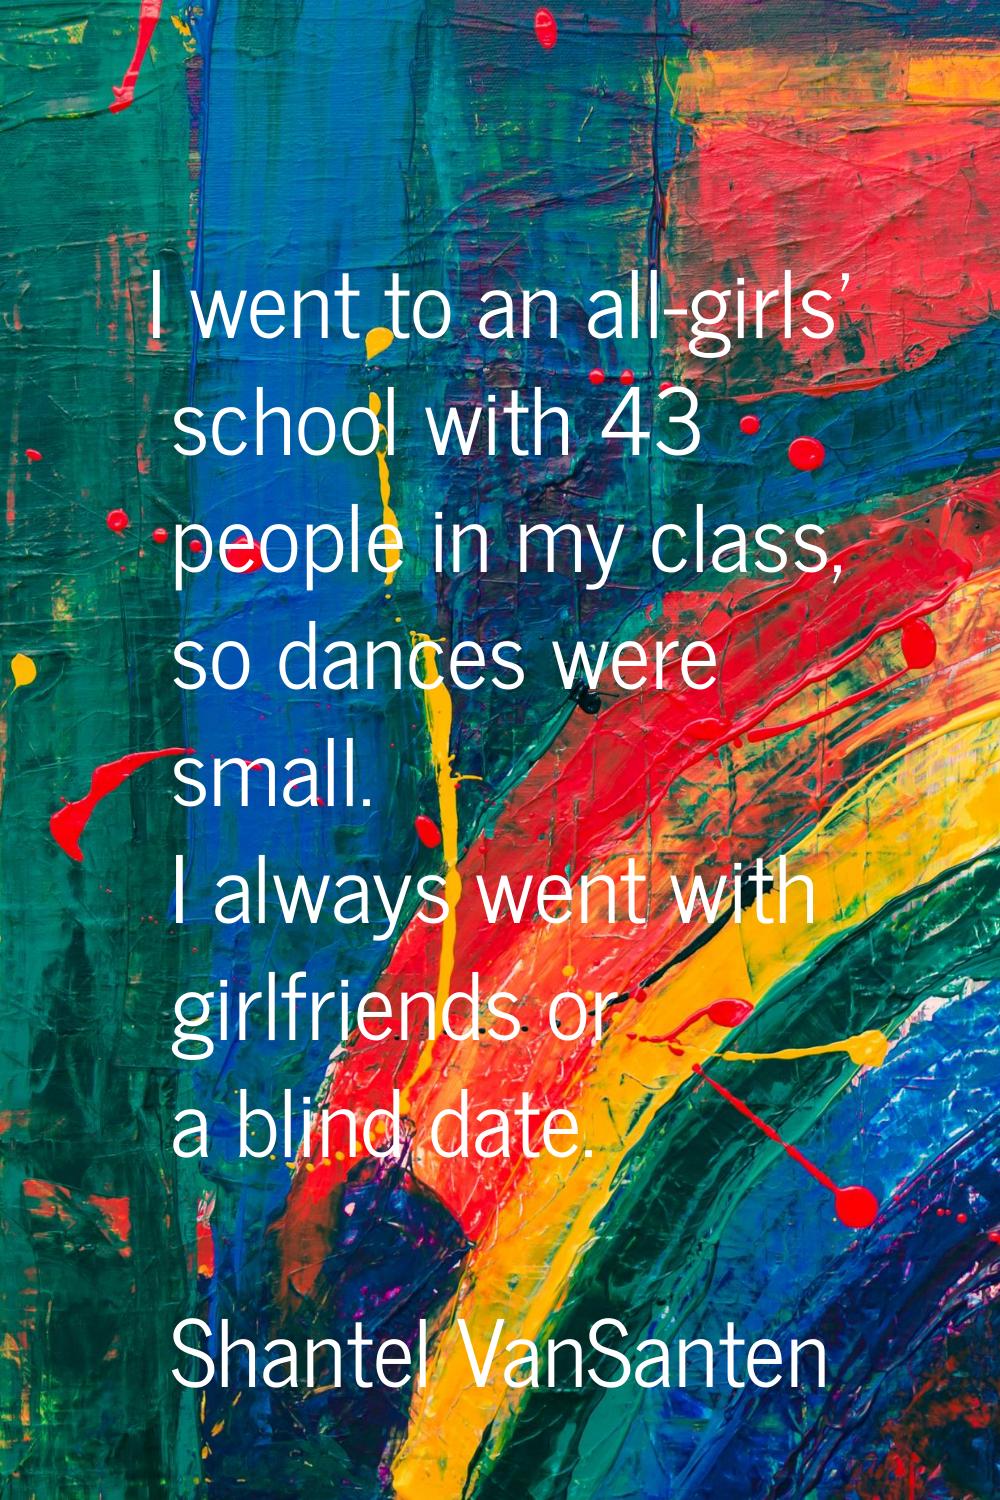 I went to an all-girls' school with 43 people in my class, so dances were small. I always went with